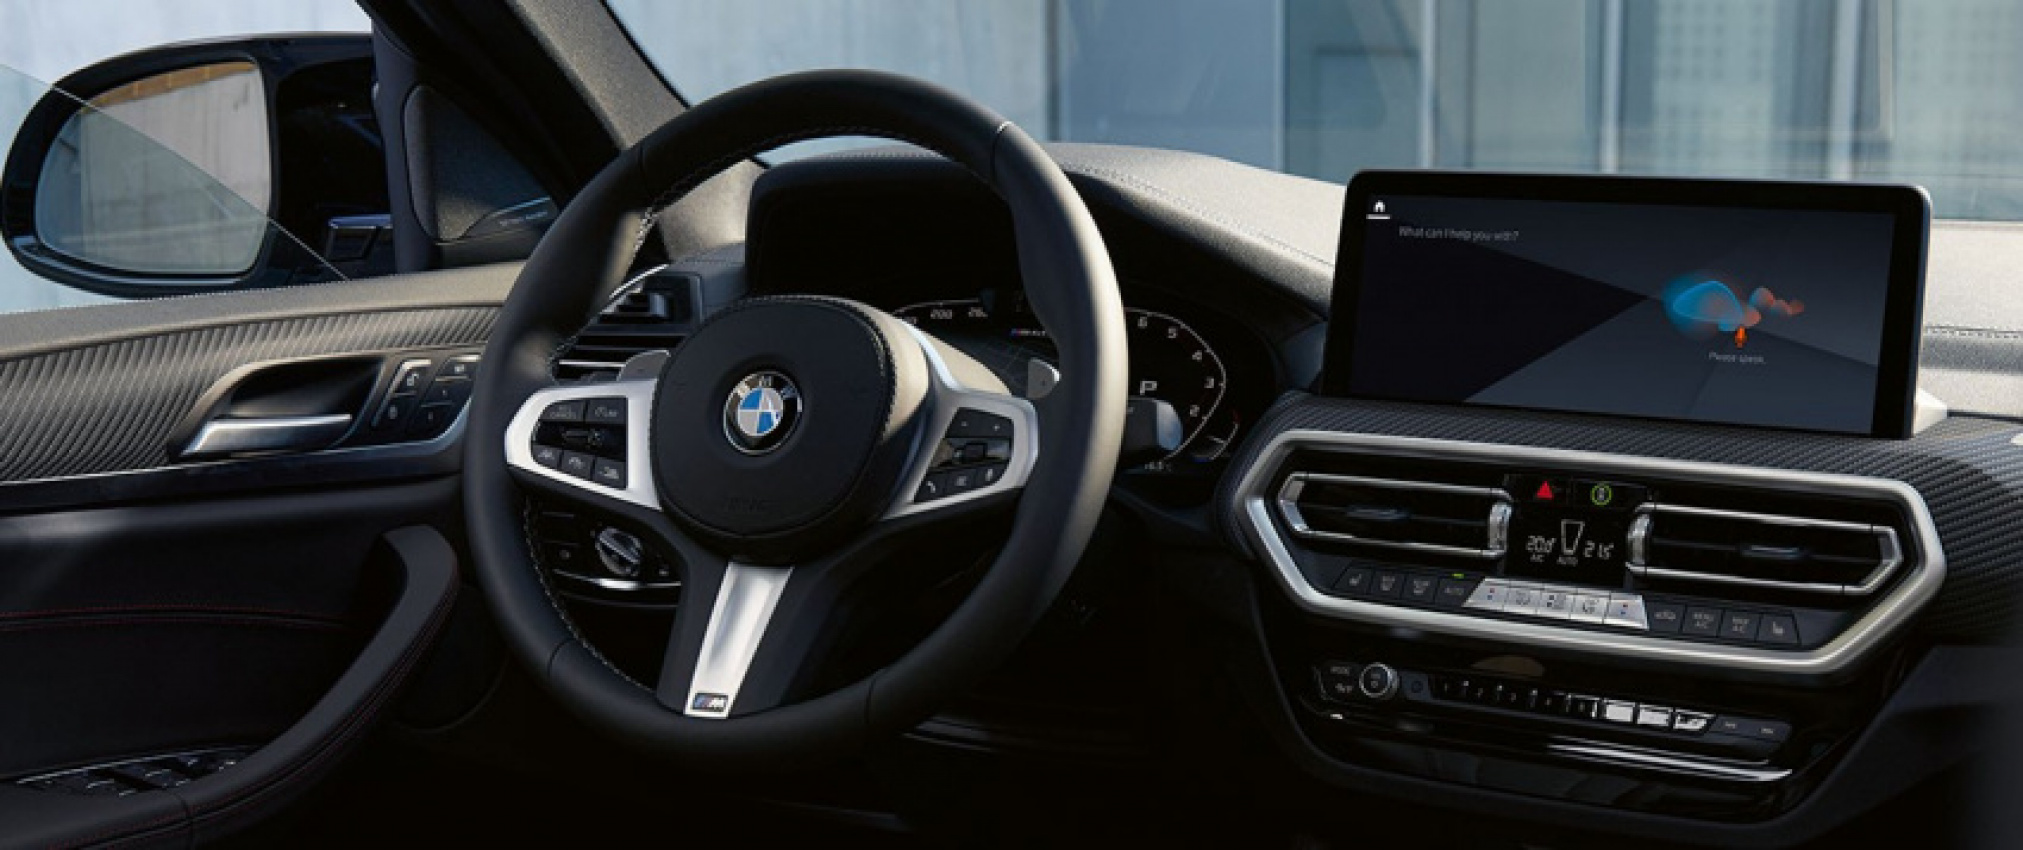 autos, bmw, cars, android, bmw x3, bmw x3 m40i, bmw x4 m40i, x3 m40i, x4 m40i, android, bmw x3 m40i and x4 m40i frozen edition revealed with sinister look